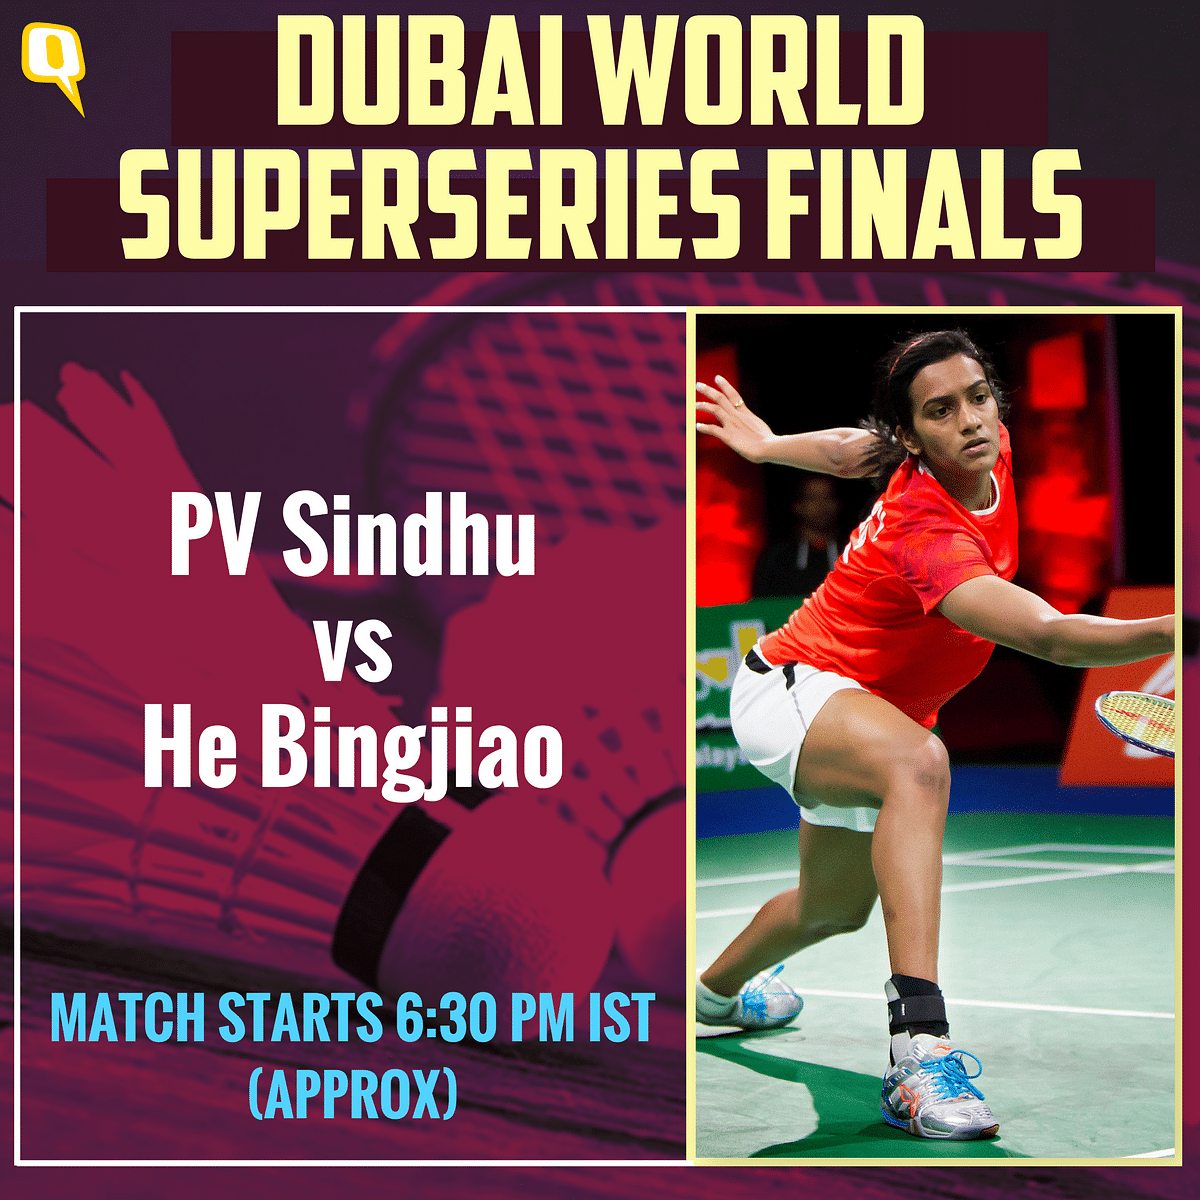 PV Sindhu and Kidambi Srikanth would be aiming for a great finale to what has been a good year for Indian badminton.